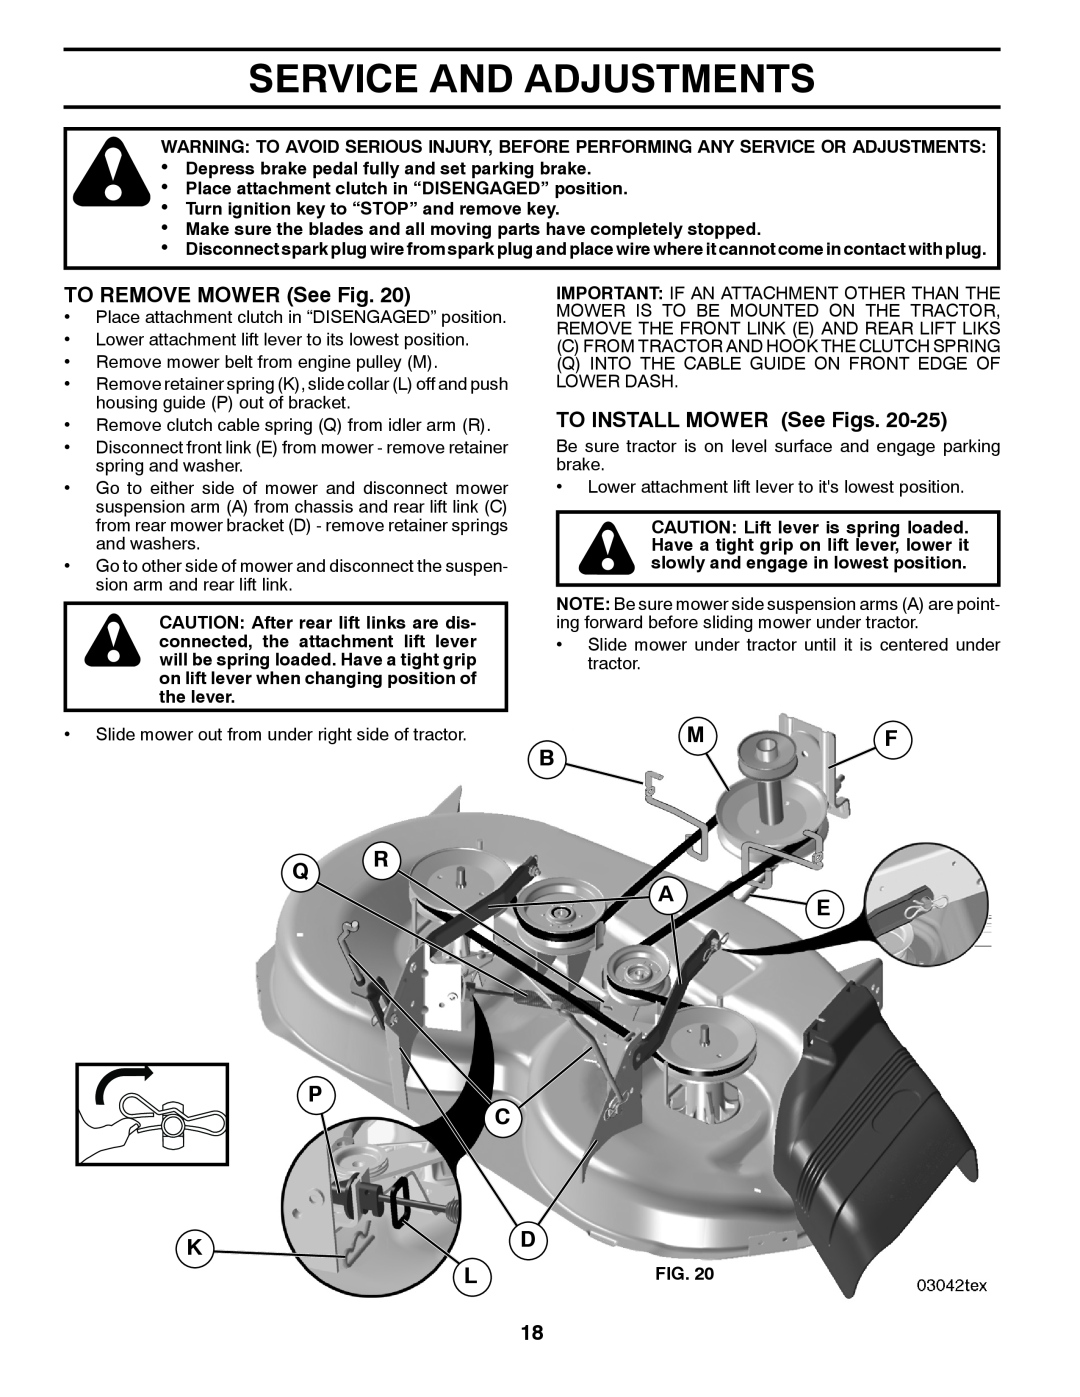 Husqvarna 96045000412 owner manual Service And Adjustments, TO REMOVE MOWER See Fig, TO INSTALL MOWER See Figs, Mf Ae 